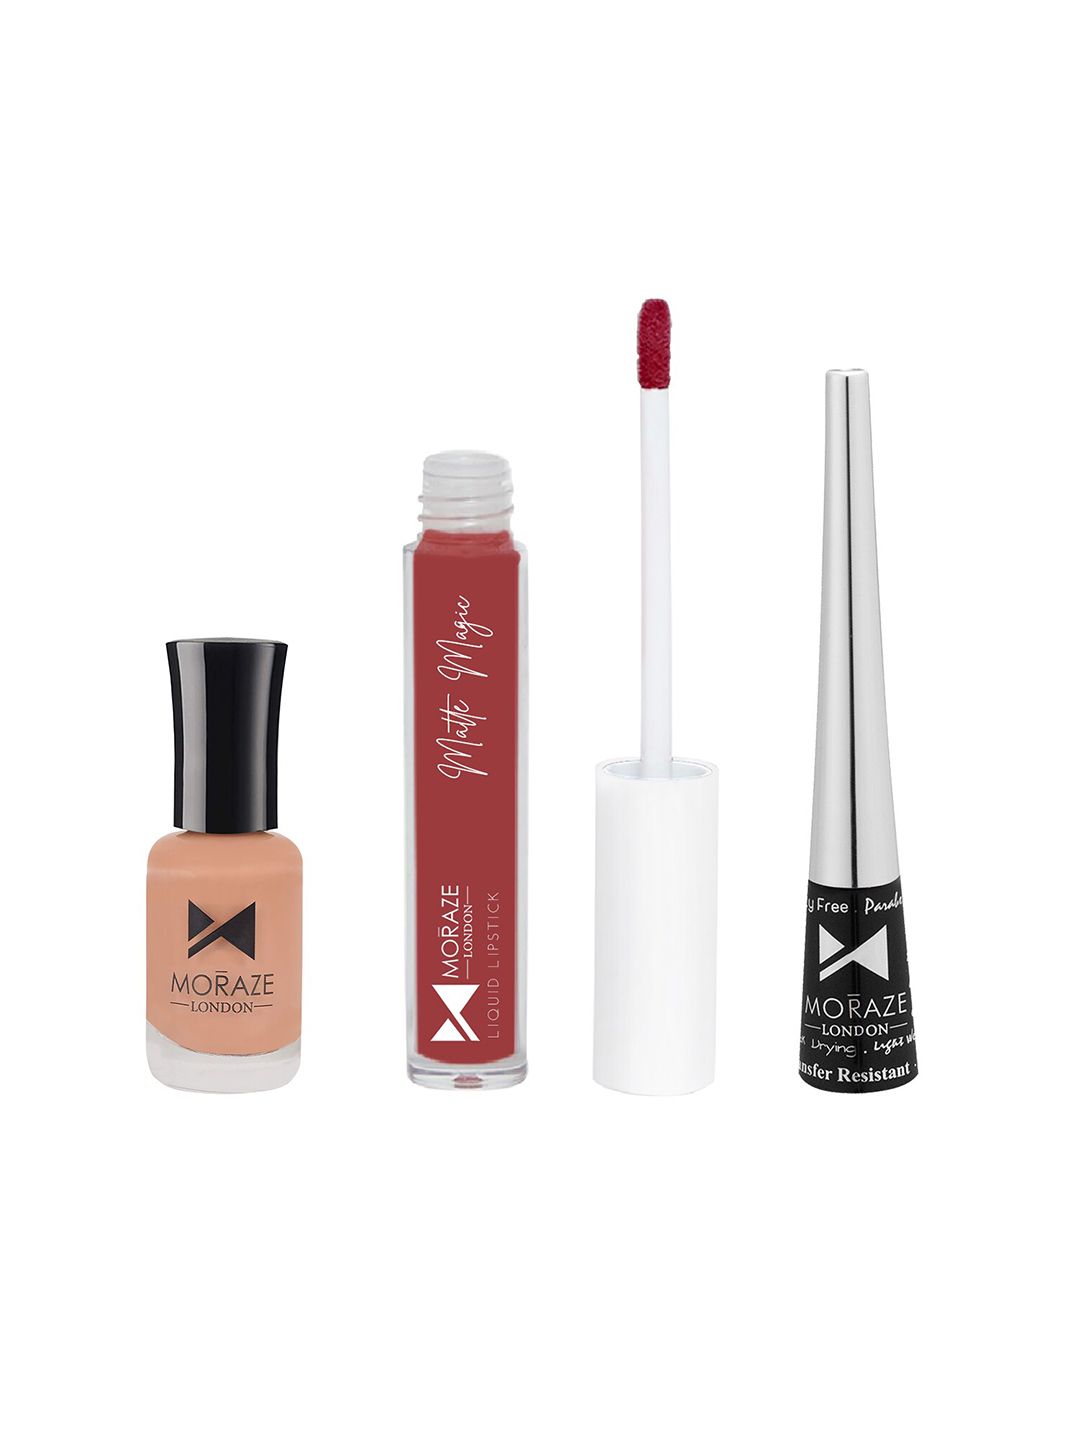 Moraze Set Of 1 Nude Nail Polish With 1 Red Liquid Lipstick & 1 Eyeliner Price in India